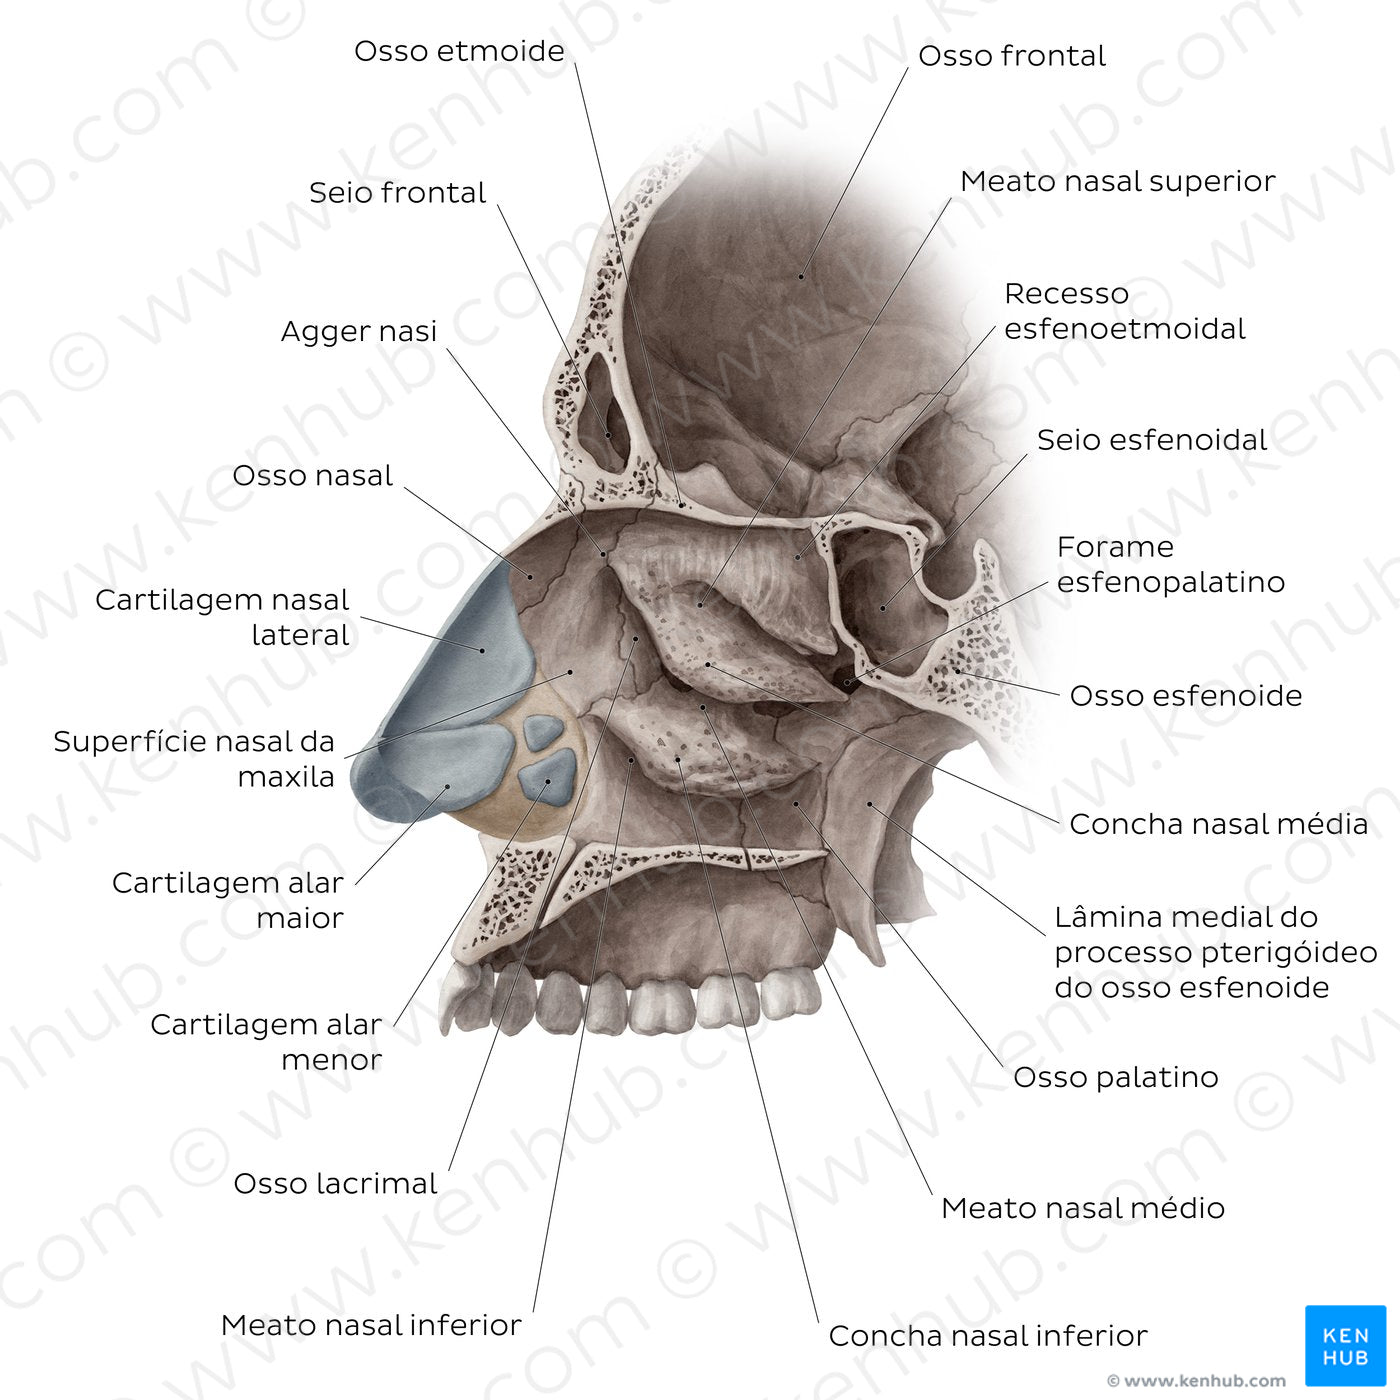 Lateral wall of the nasal cavity (Portuguese)